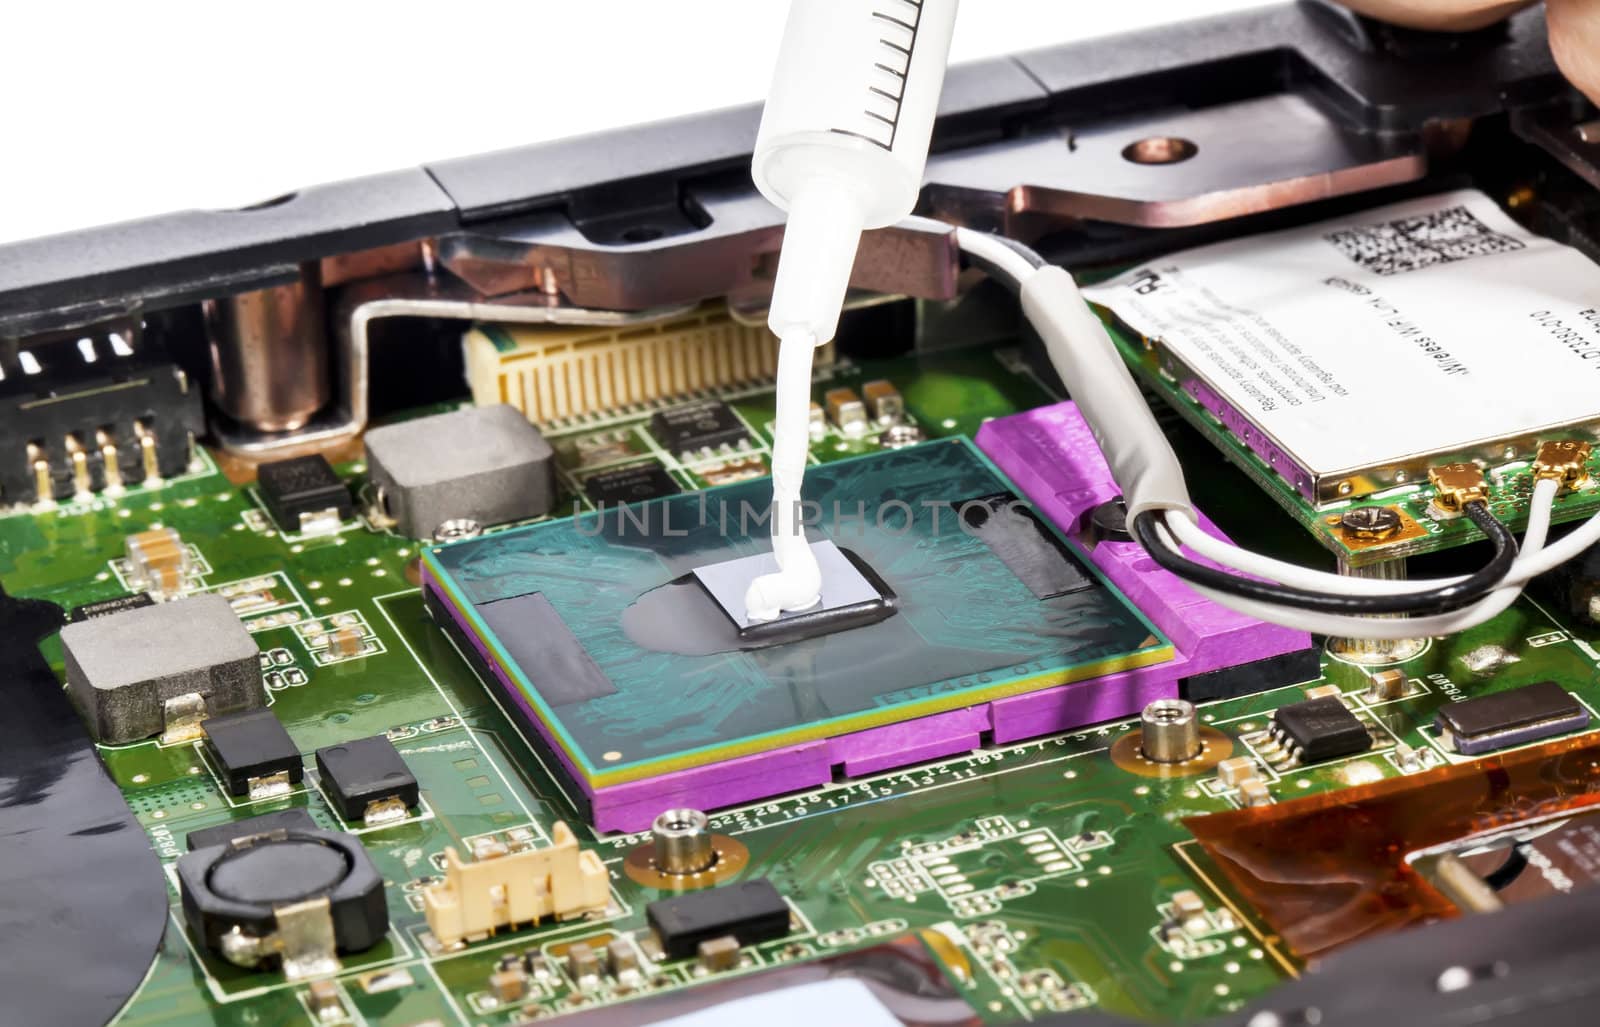 Thermal compound in syringe and laptop video chip by RawGroup